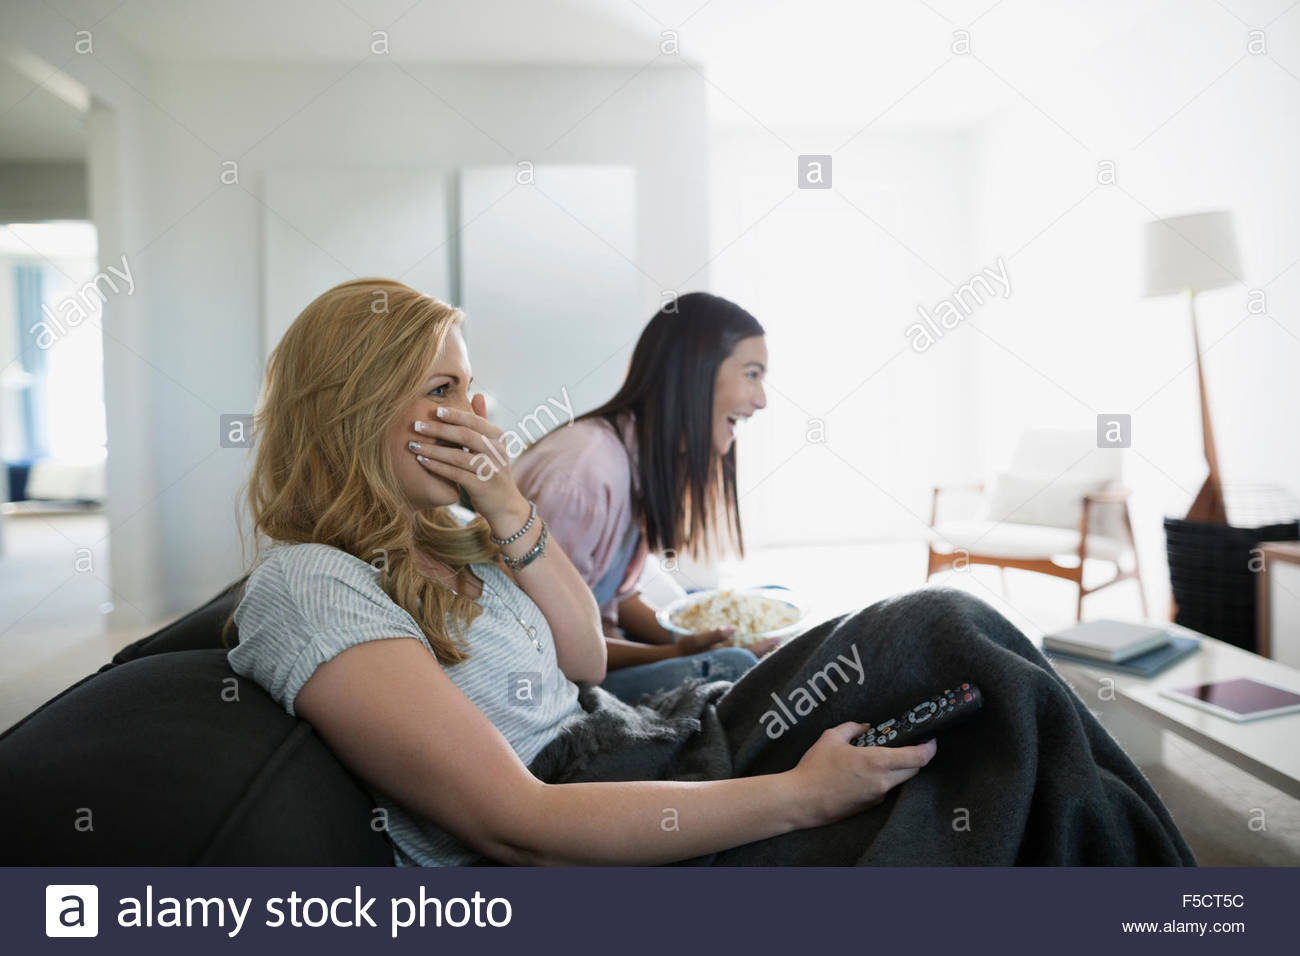 Laughing friends watching TV on living room sofa Stock Photo